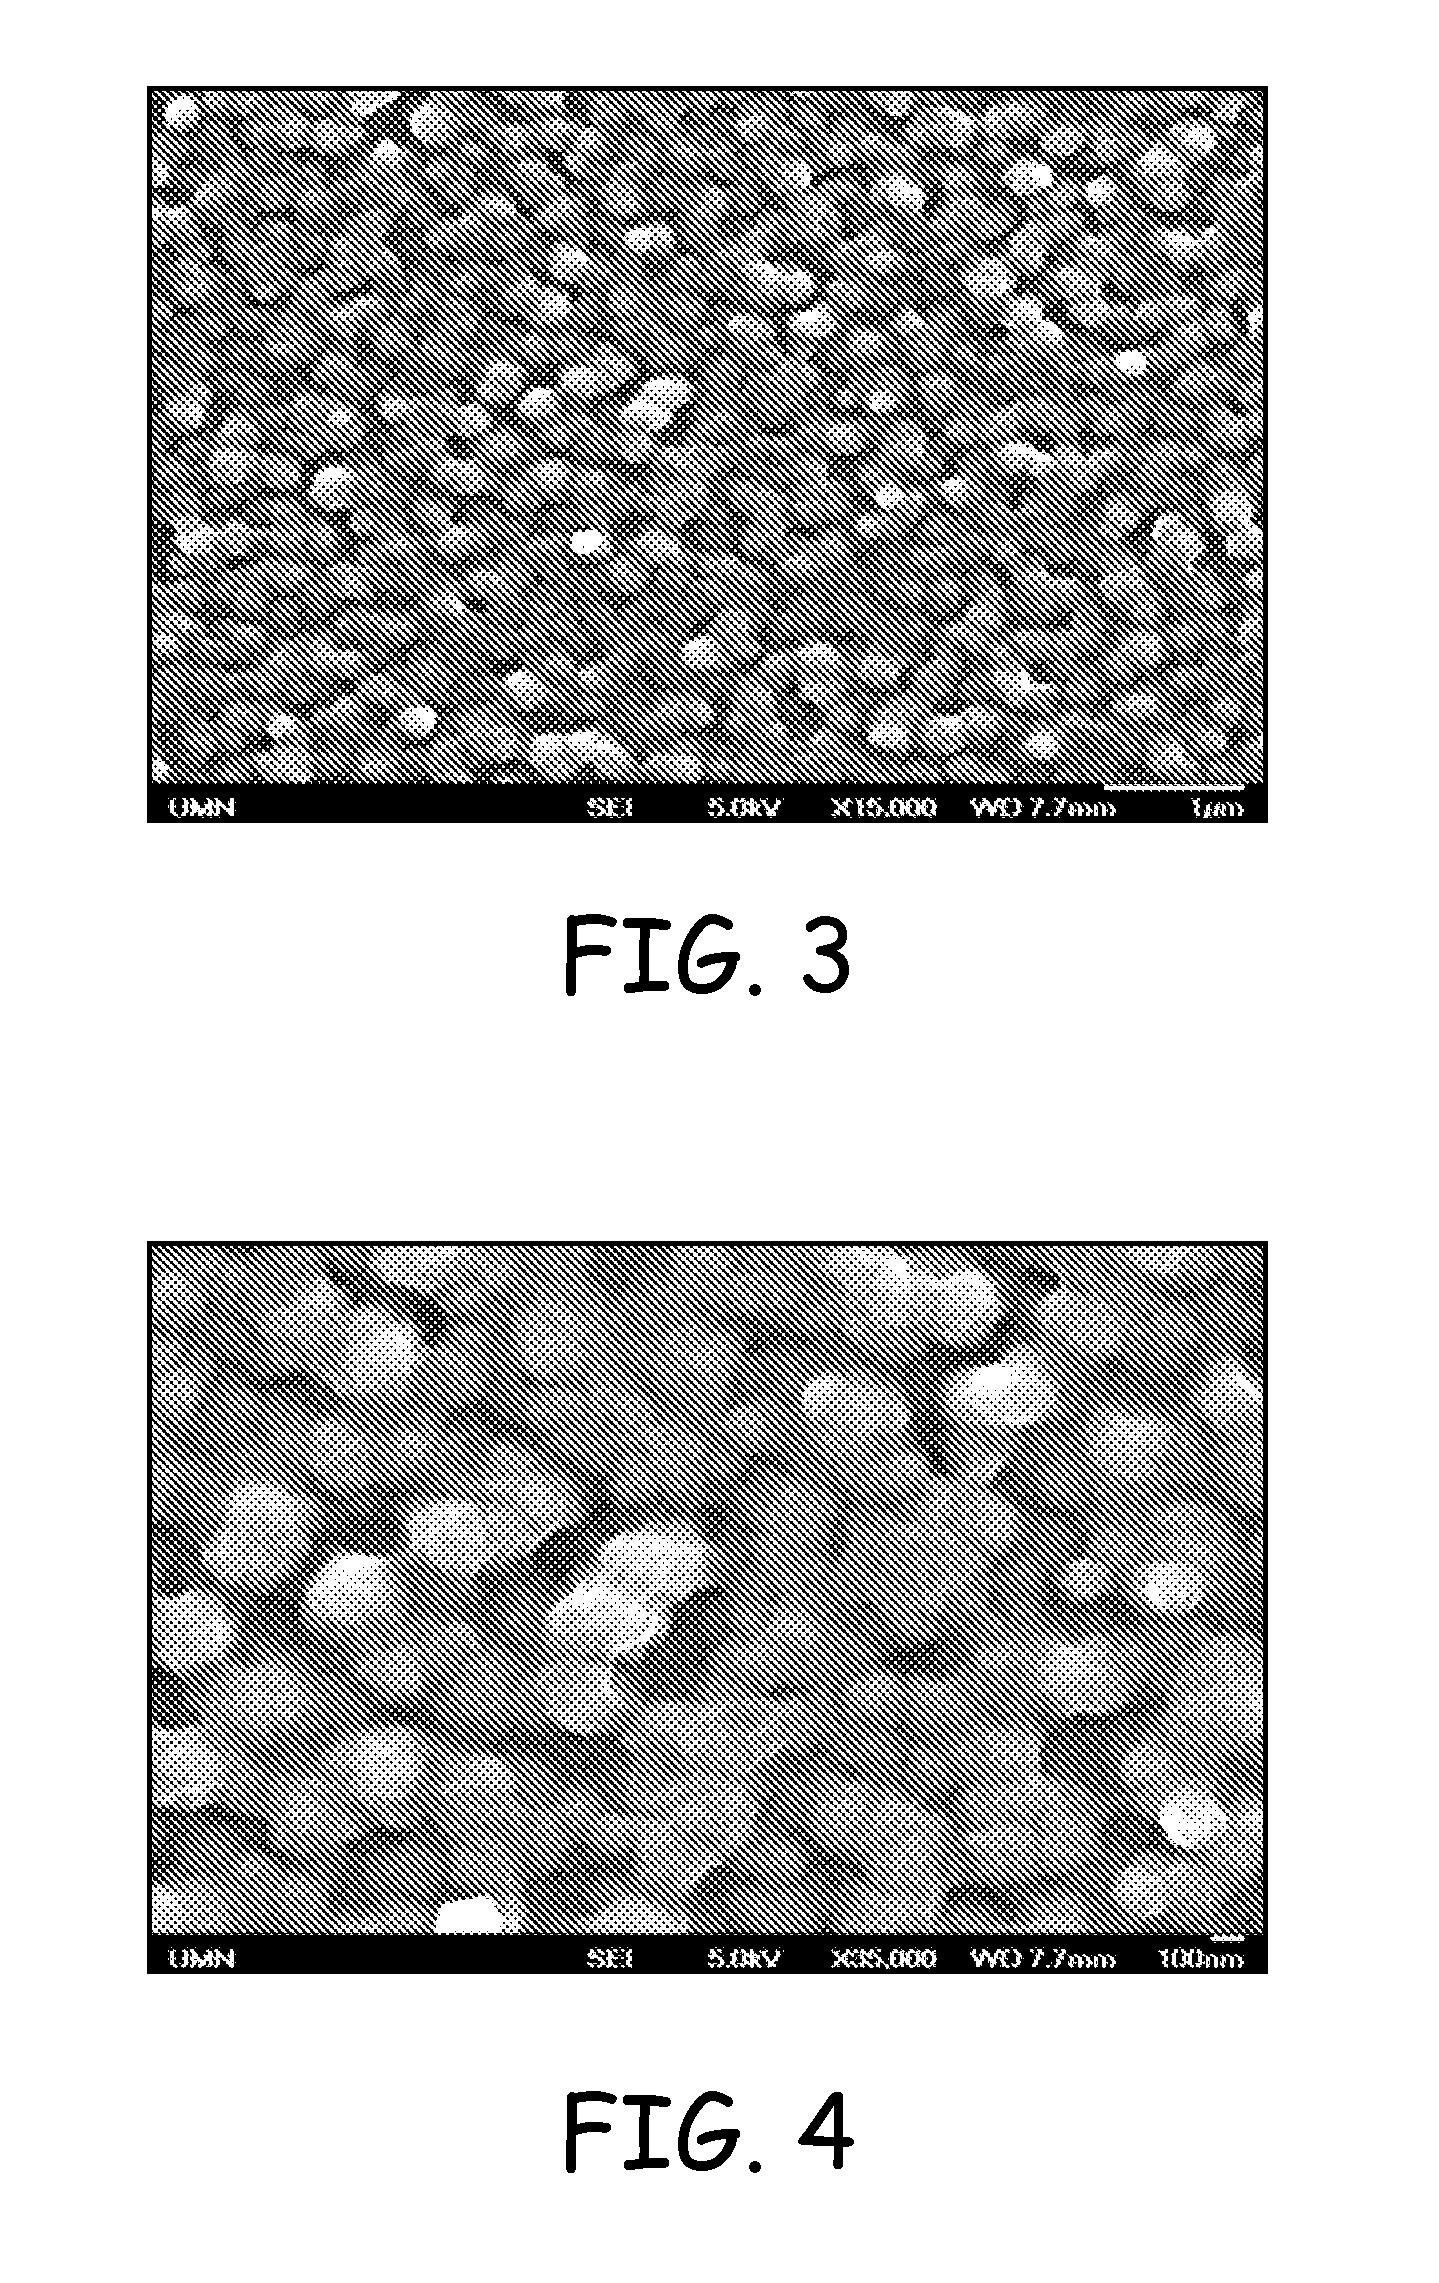 Apparatus and methods for plasma enhanced chemical vapor deposition of polymer coatings